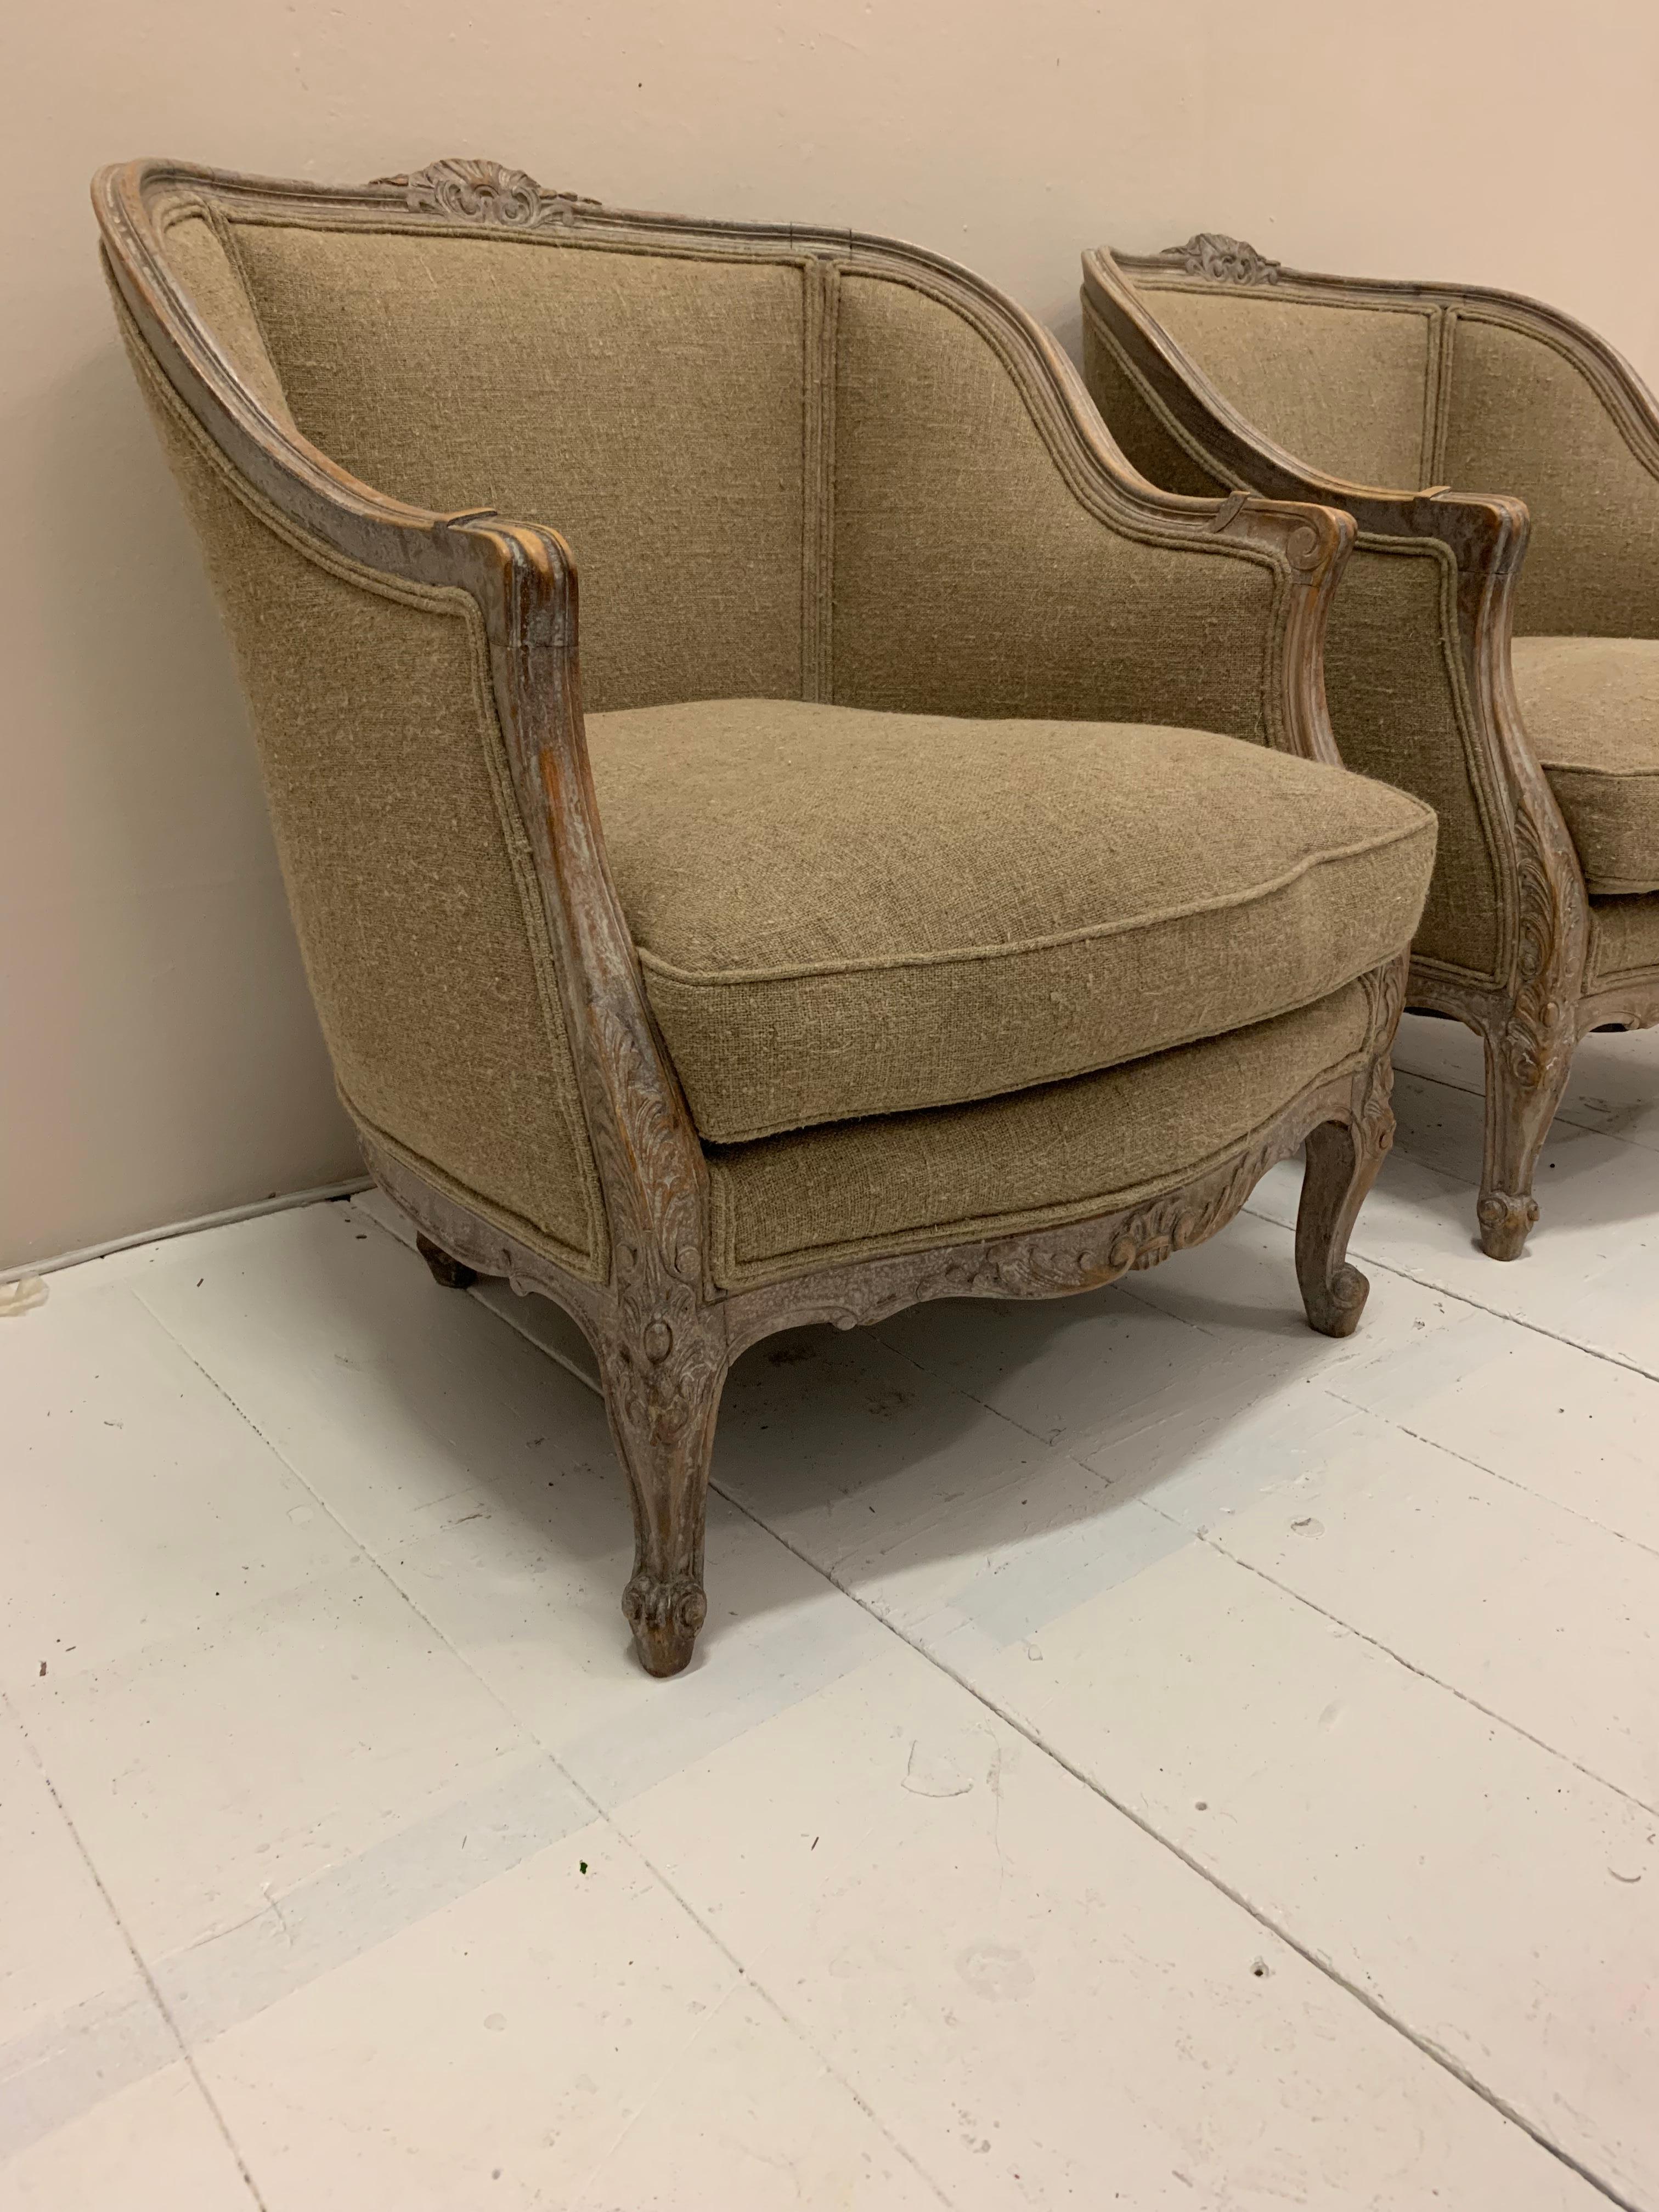 A pair of lovely Swedish armchairs circa 1920s designed in the French manner.
The wood surround has decorative detailing with a light wash which shows some traces of the original paint.
The armchairs are comfortable and of a decent size with deep